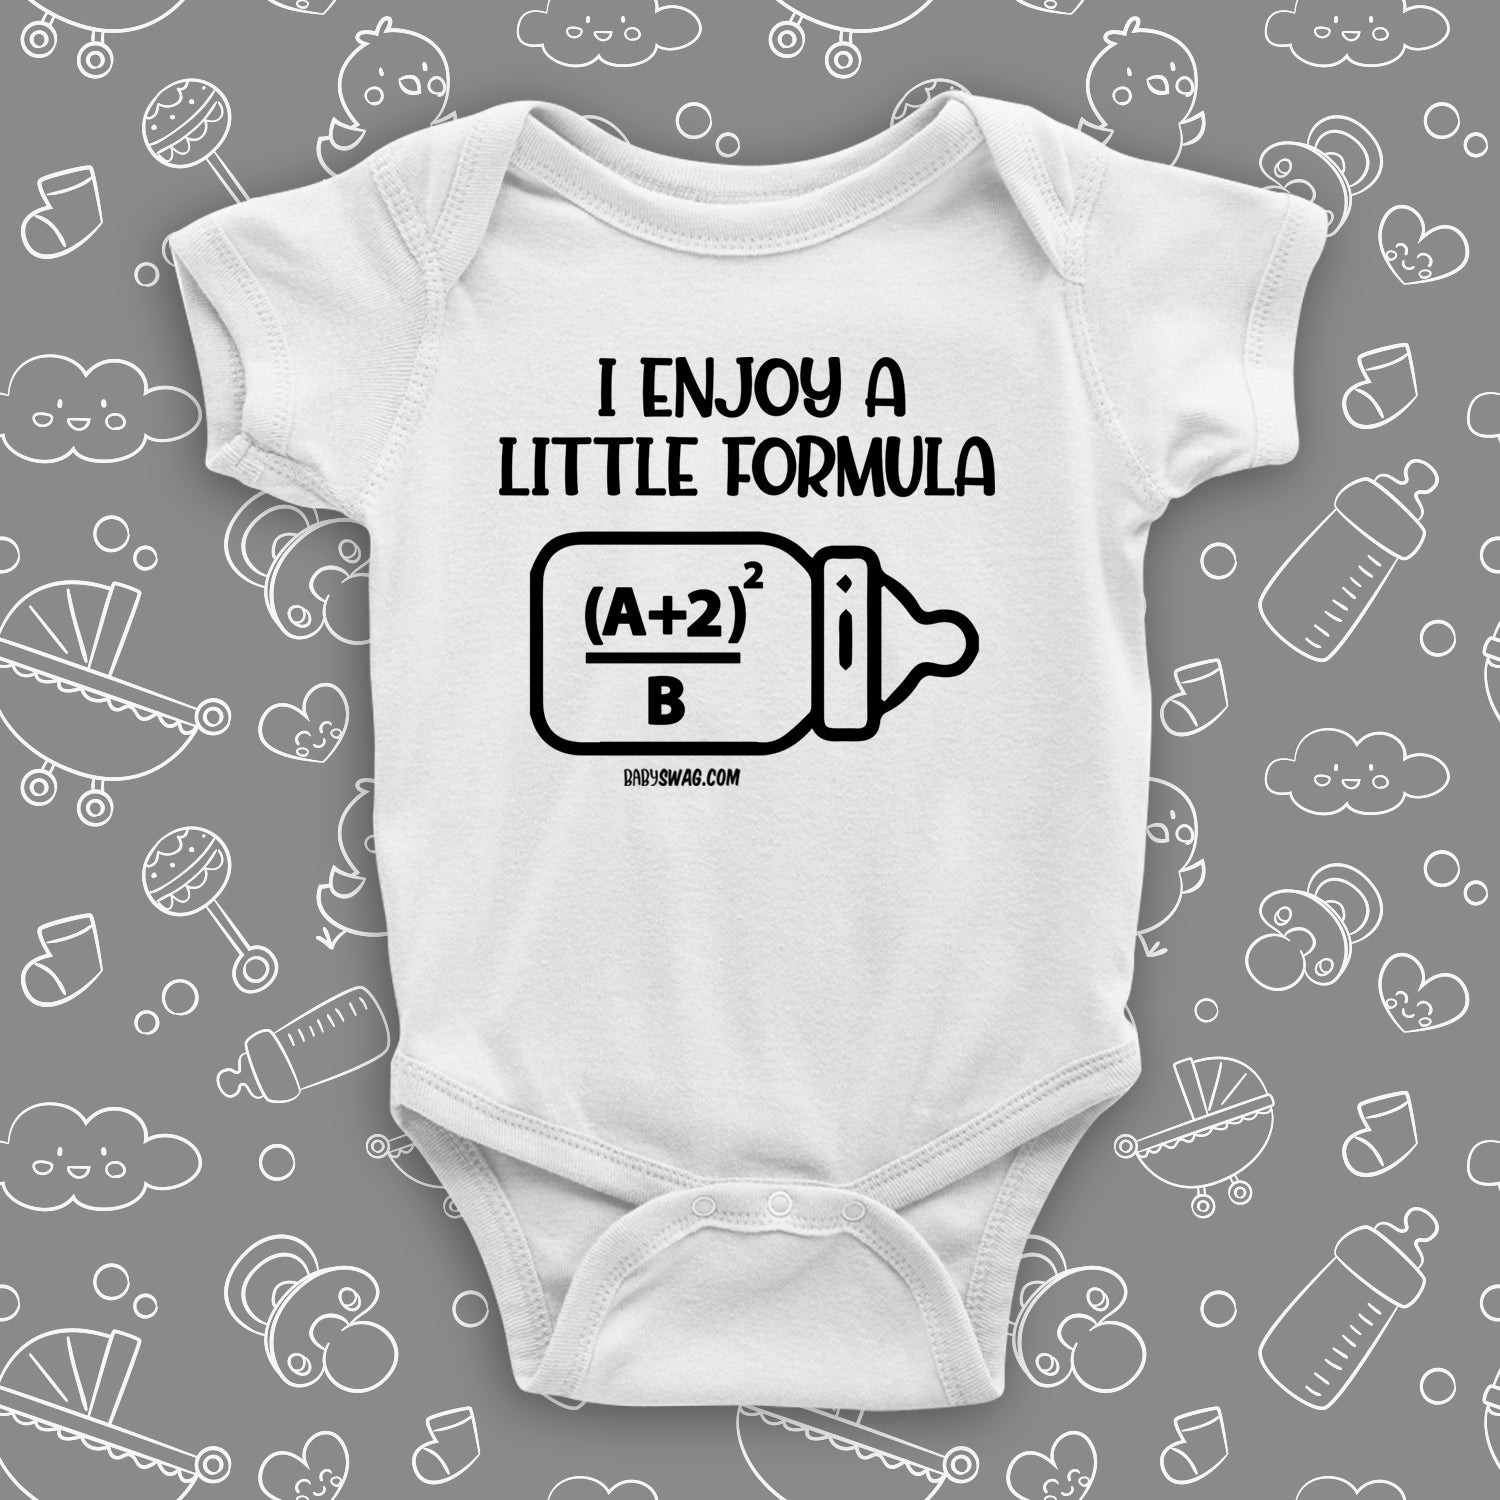 The "I Enjoy A Little Formula" graphic baby onesies in white.